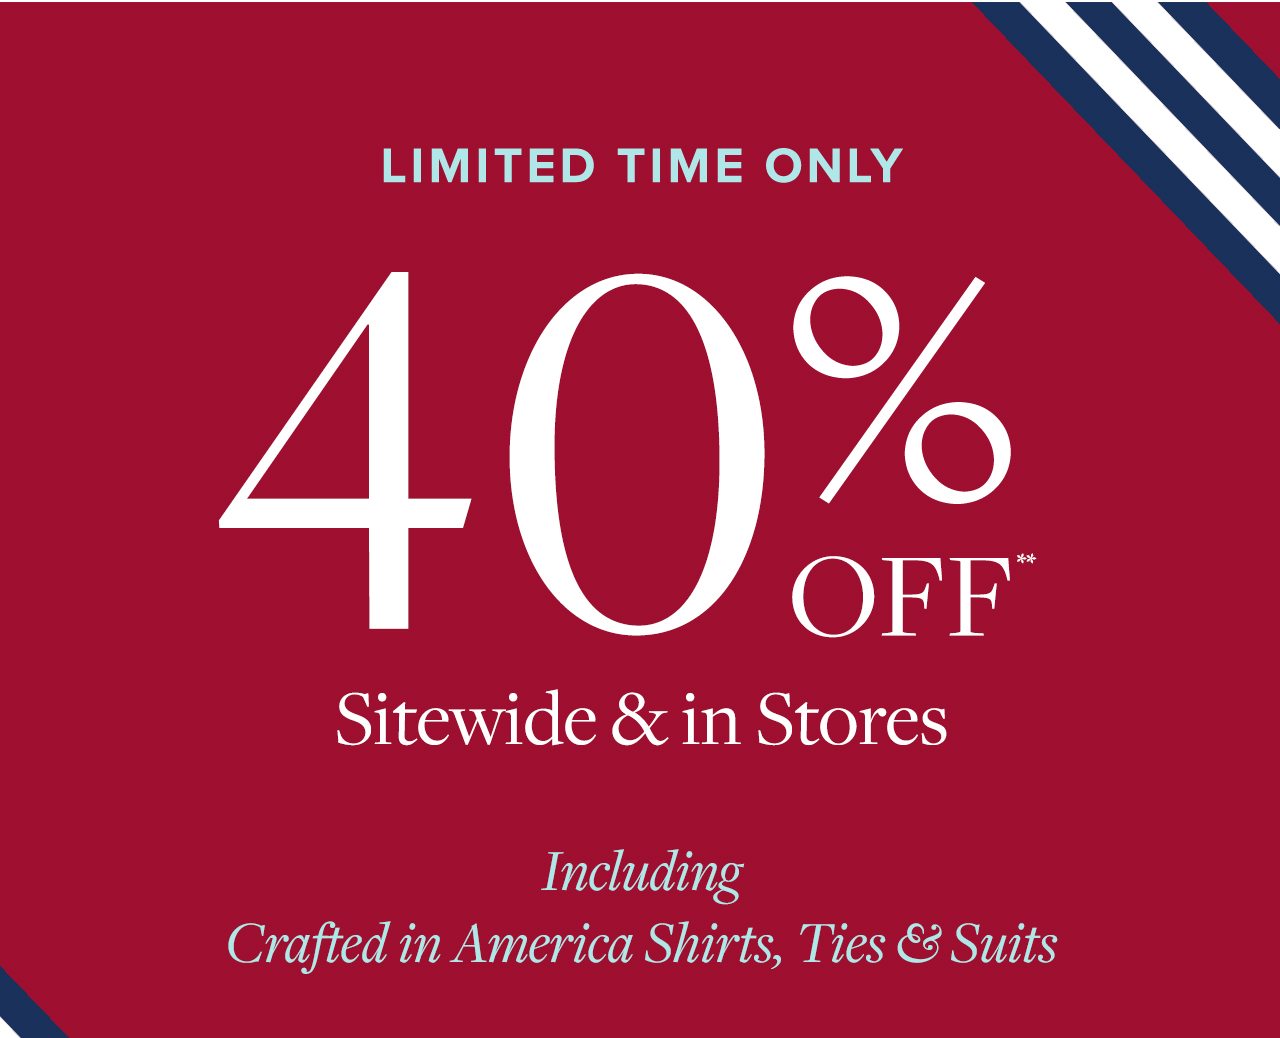 Limited Time Only 40% Off Sitewide and in Stores Including Crafted in America Shirts, Ties and Suits